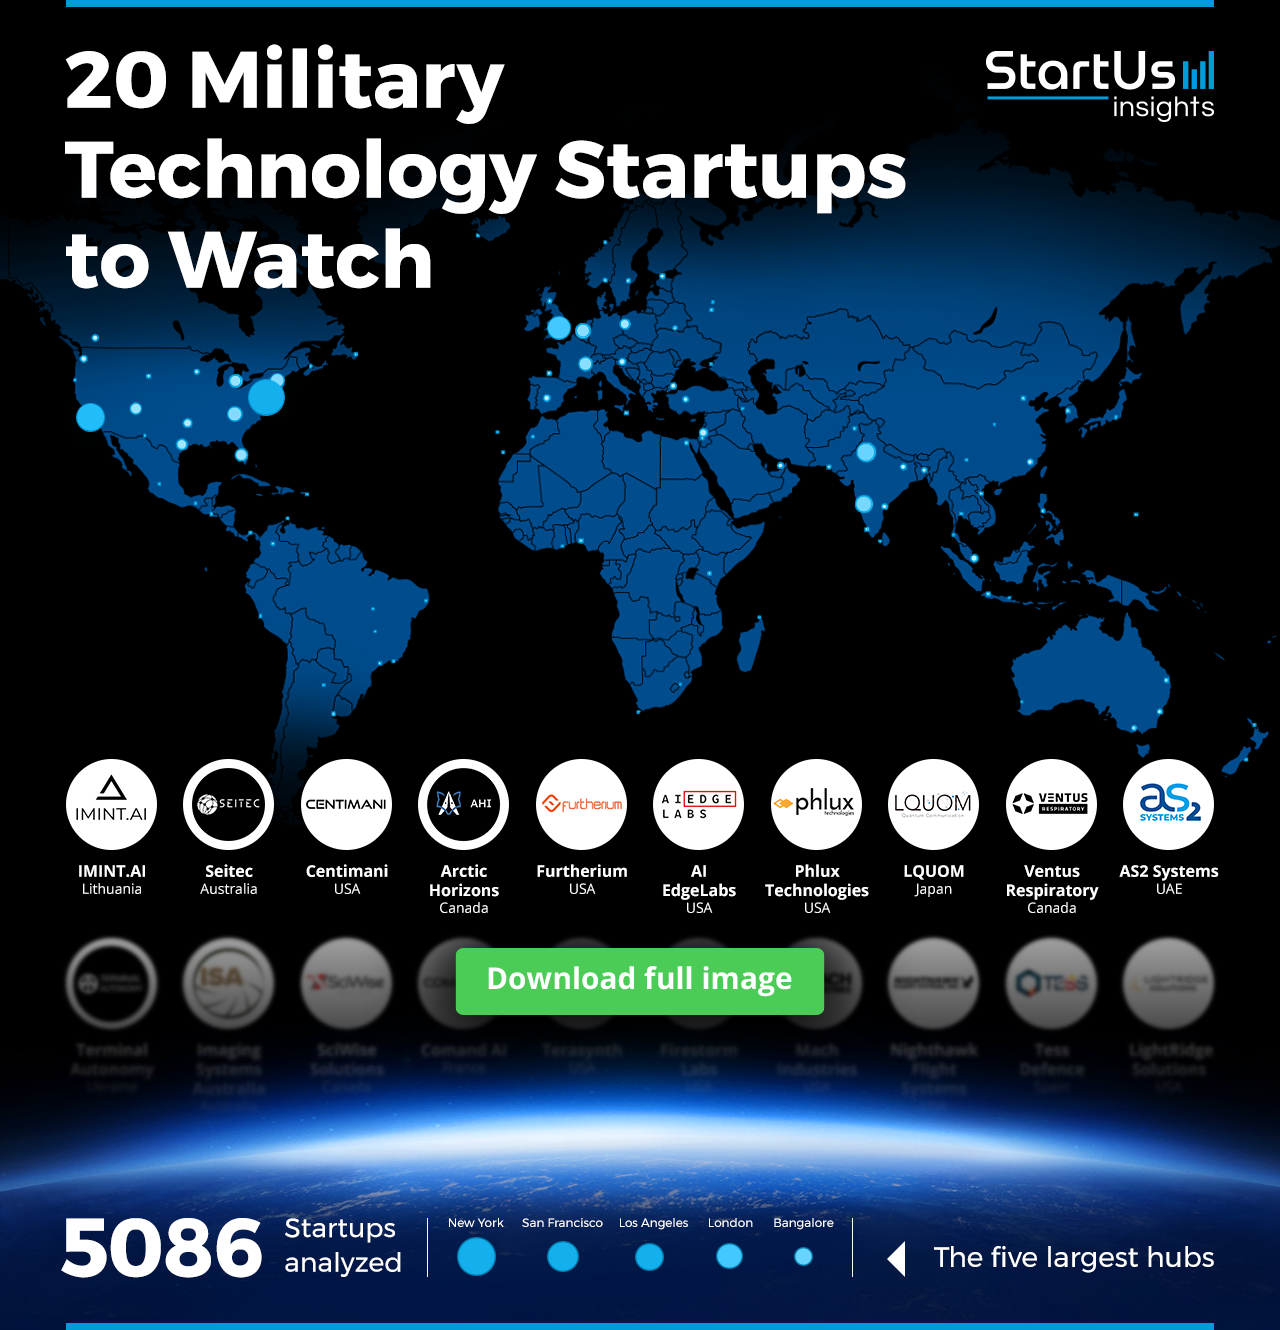 Military-Tech-Startups-to-Watch-Heat-Map-Blurred-StartUs-Insights-noresize